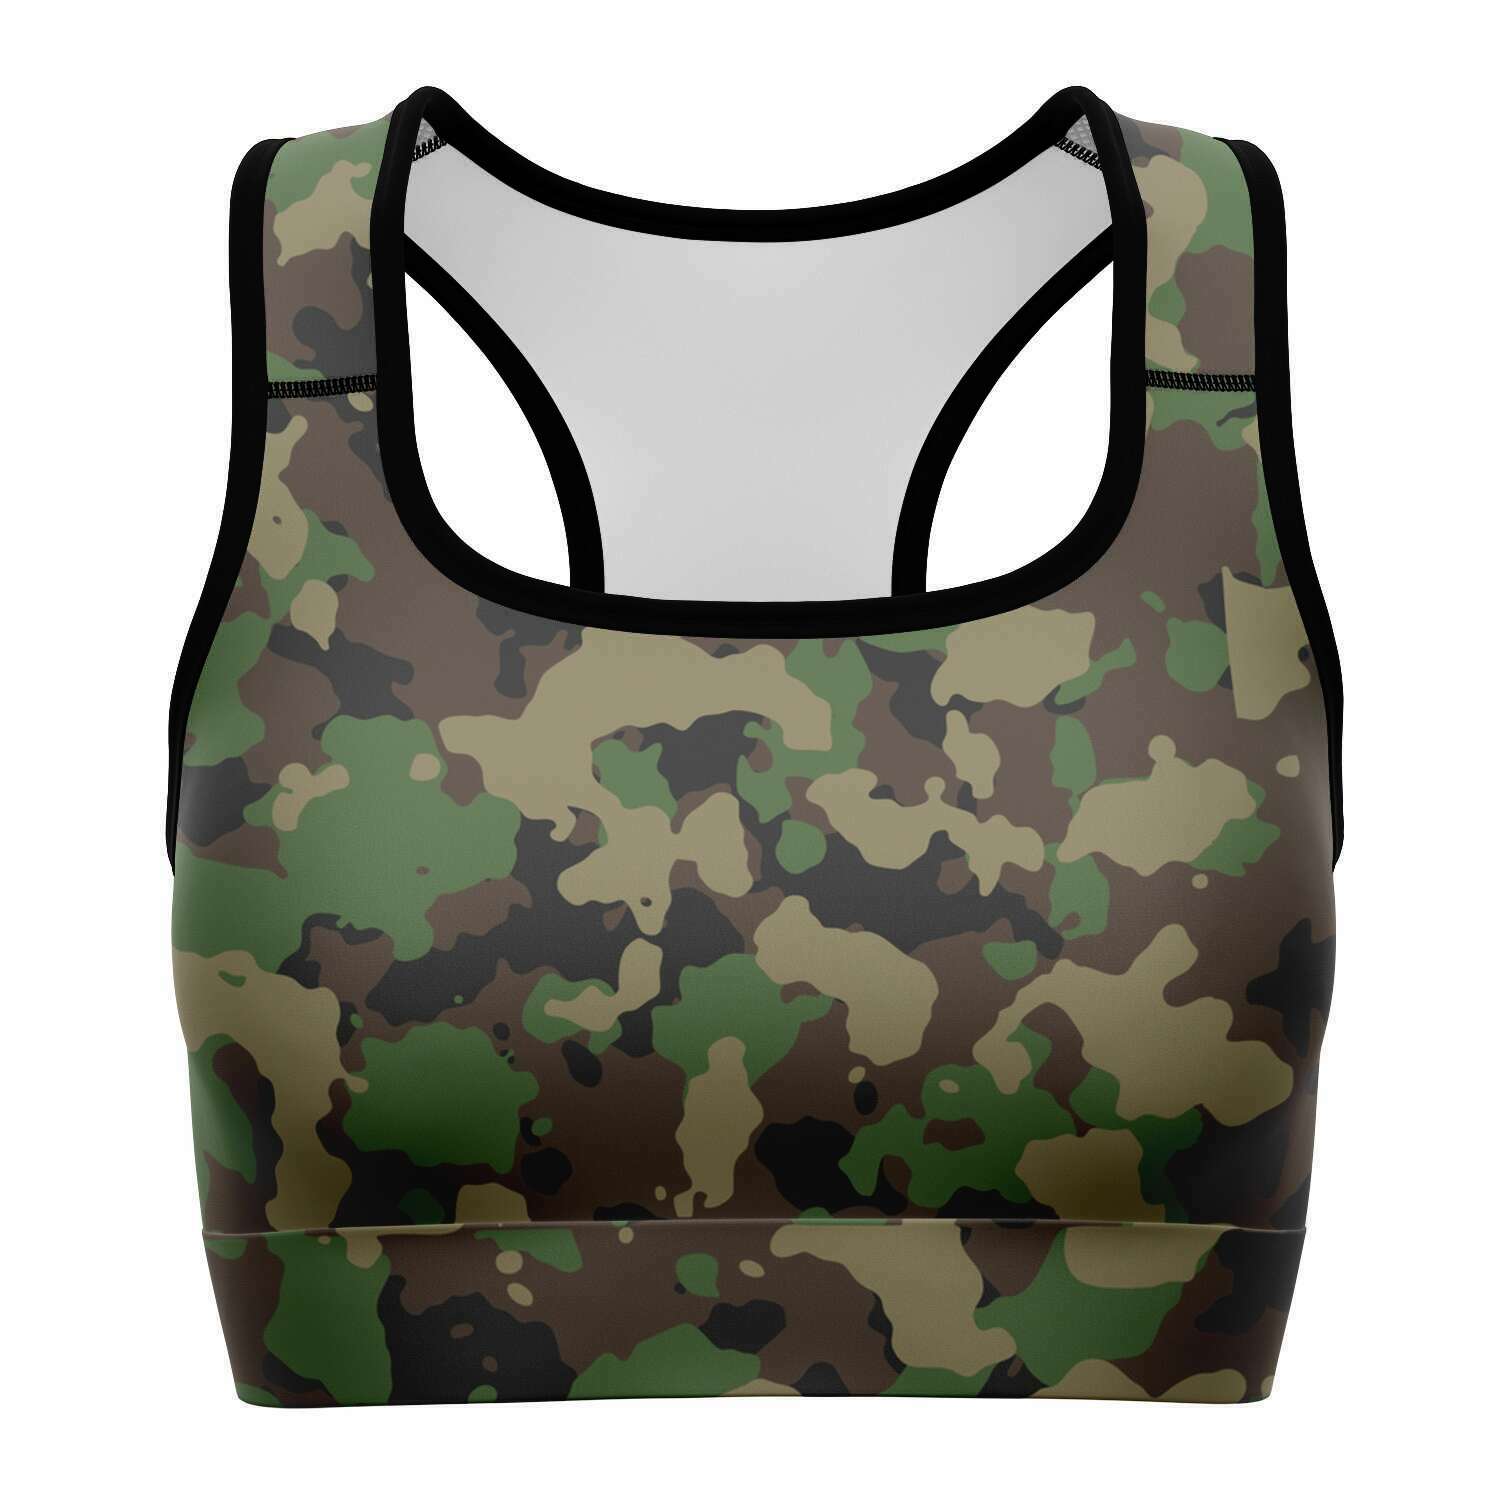 Women's Classic Army Woodland Forest Camouflage Athletic Sports Bra